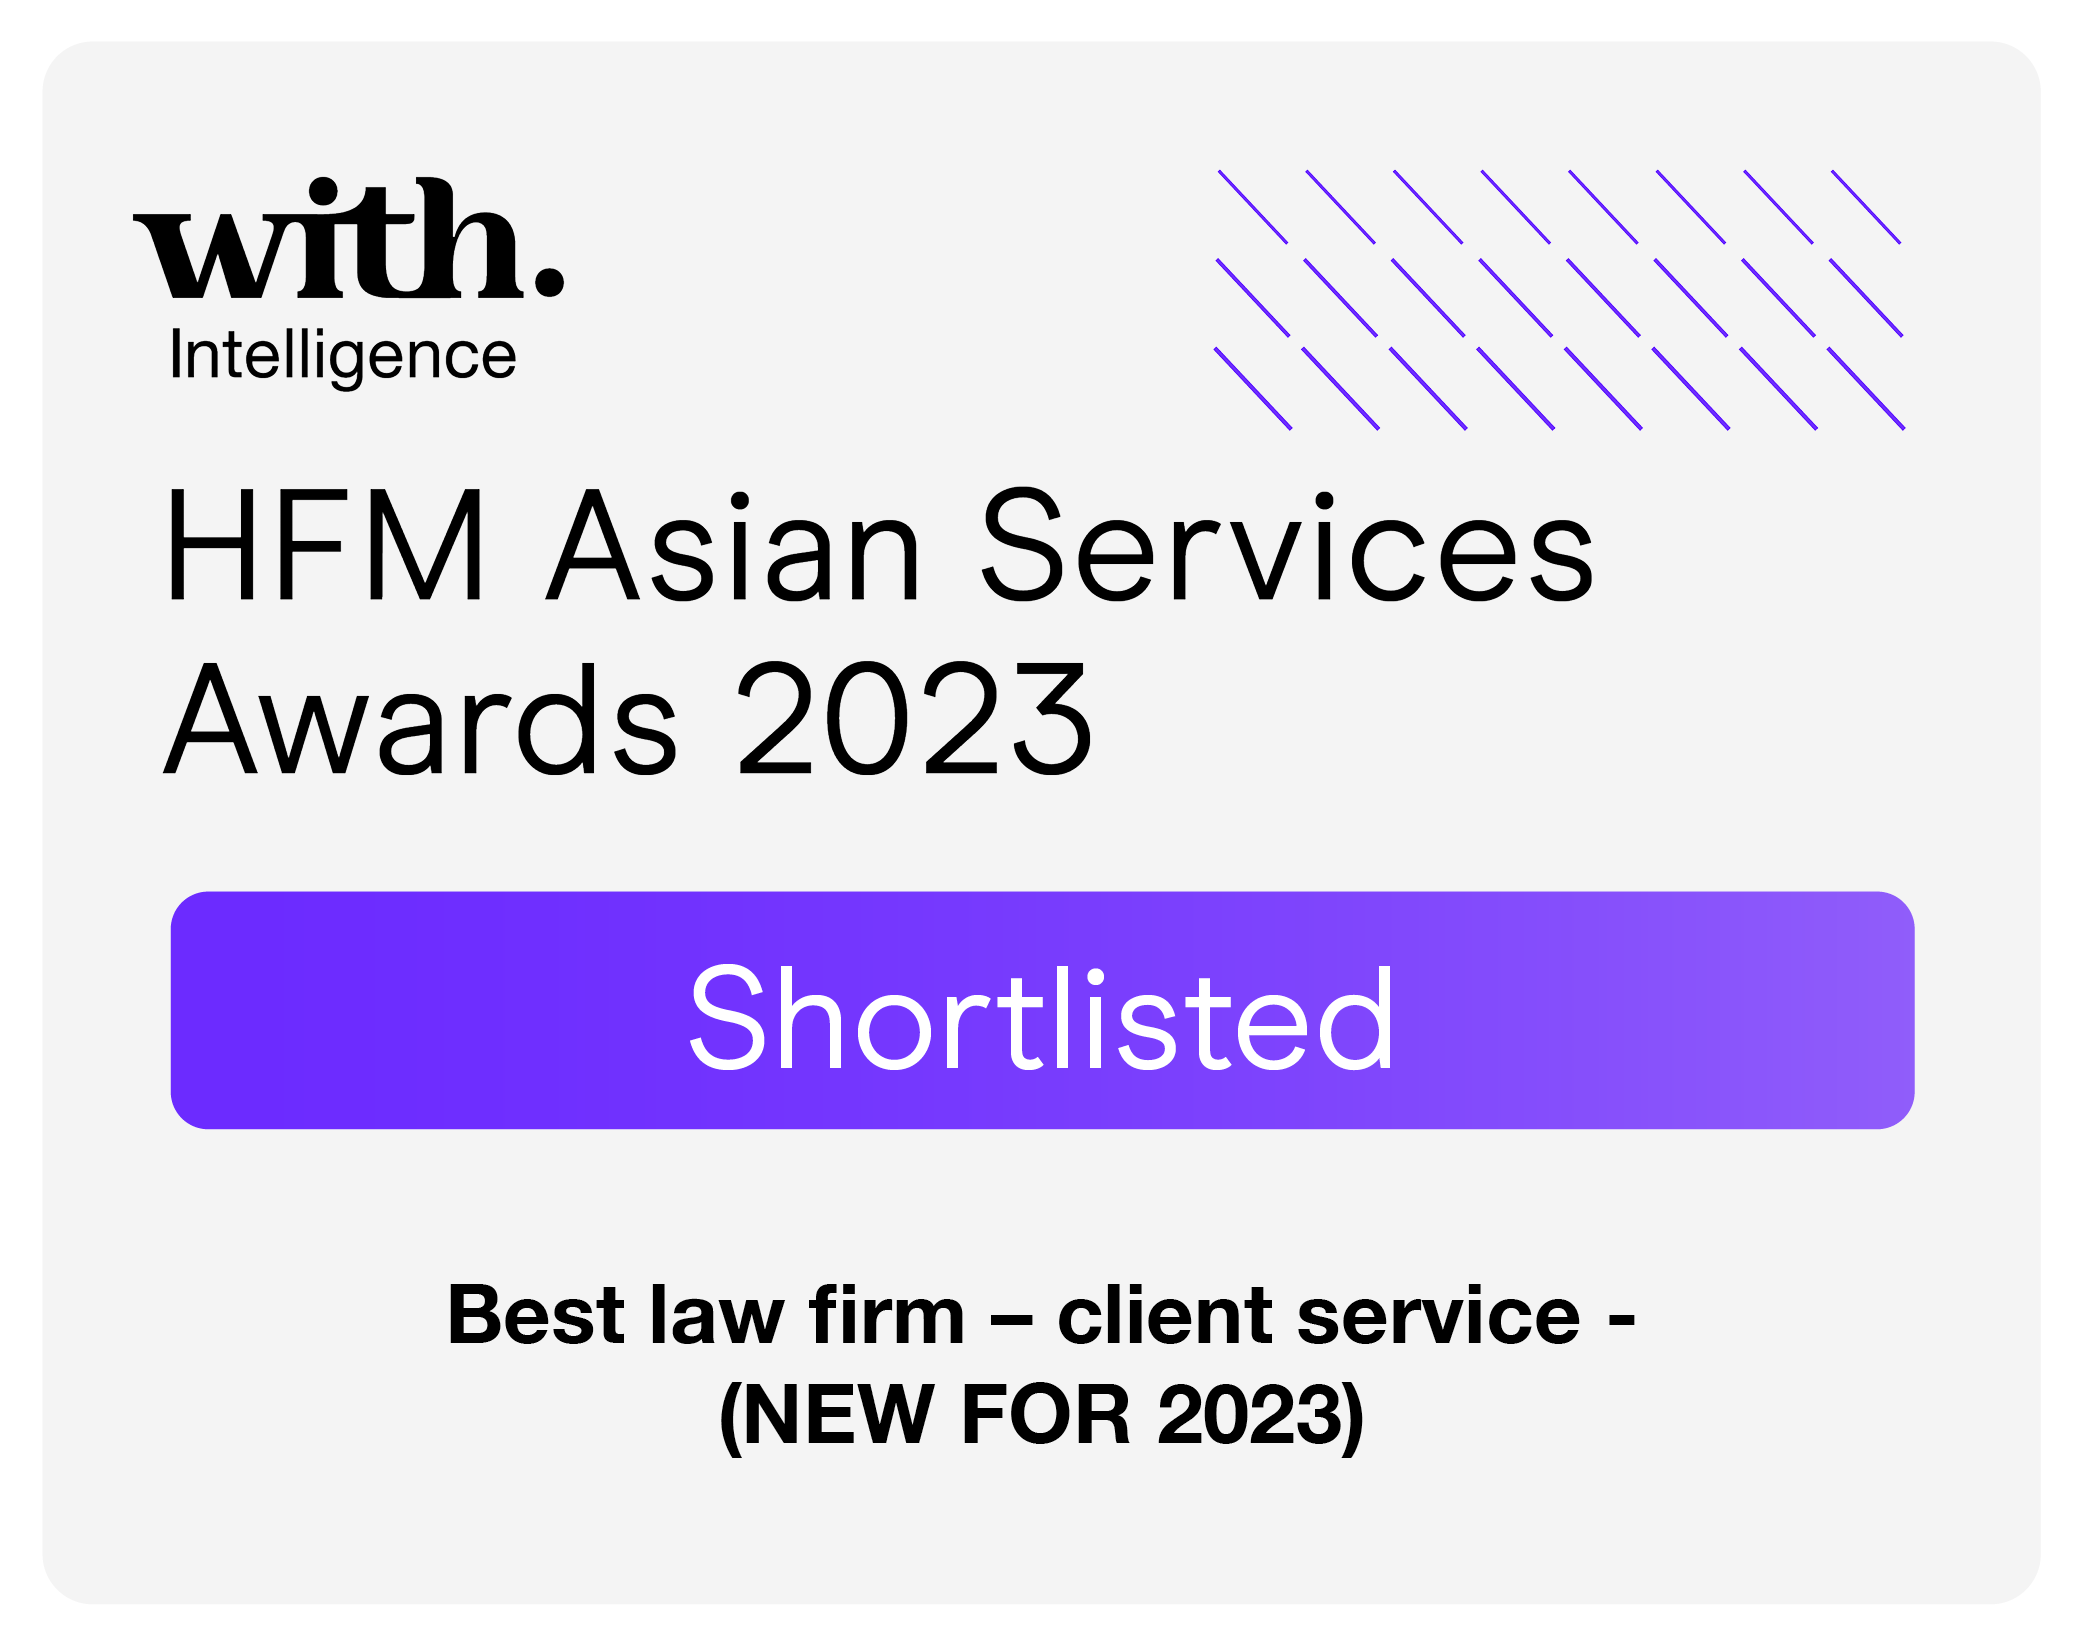 HFM Asian Services Awards 2023 - Best Law Firm - Client Service